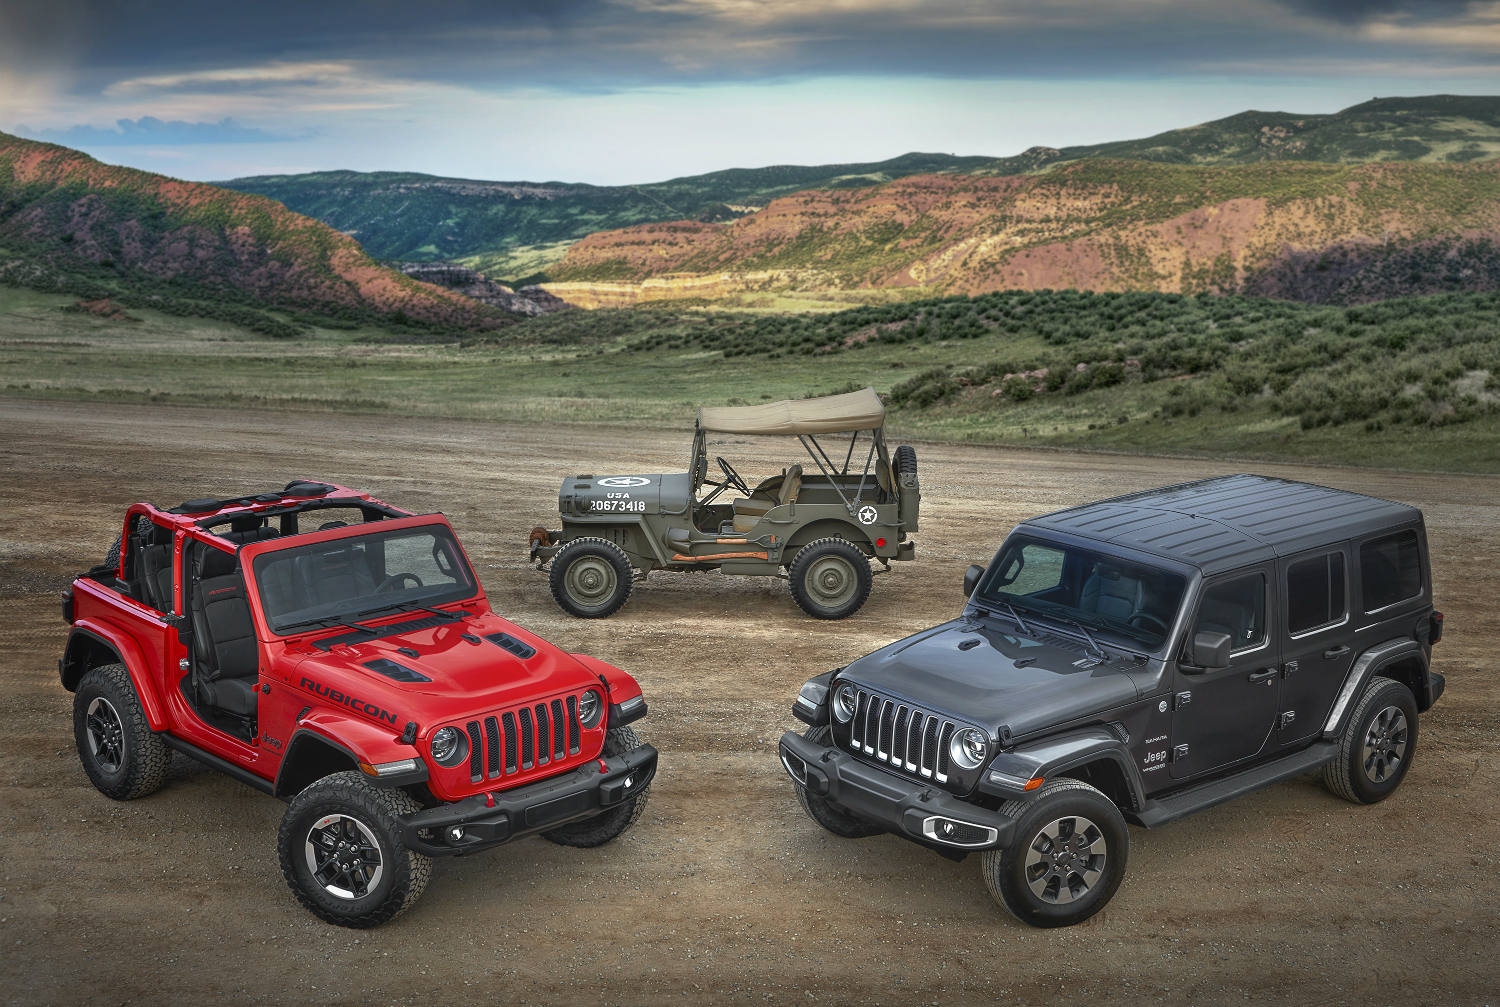 2018 Jeep Wrangler JL Rubicon and Sahara and 1944 Jeep-Willys Overland MB